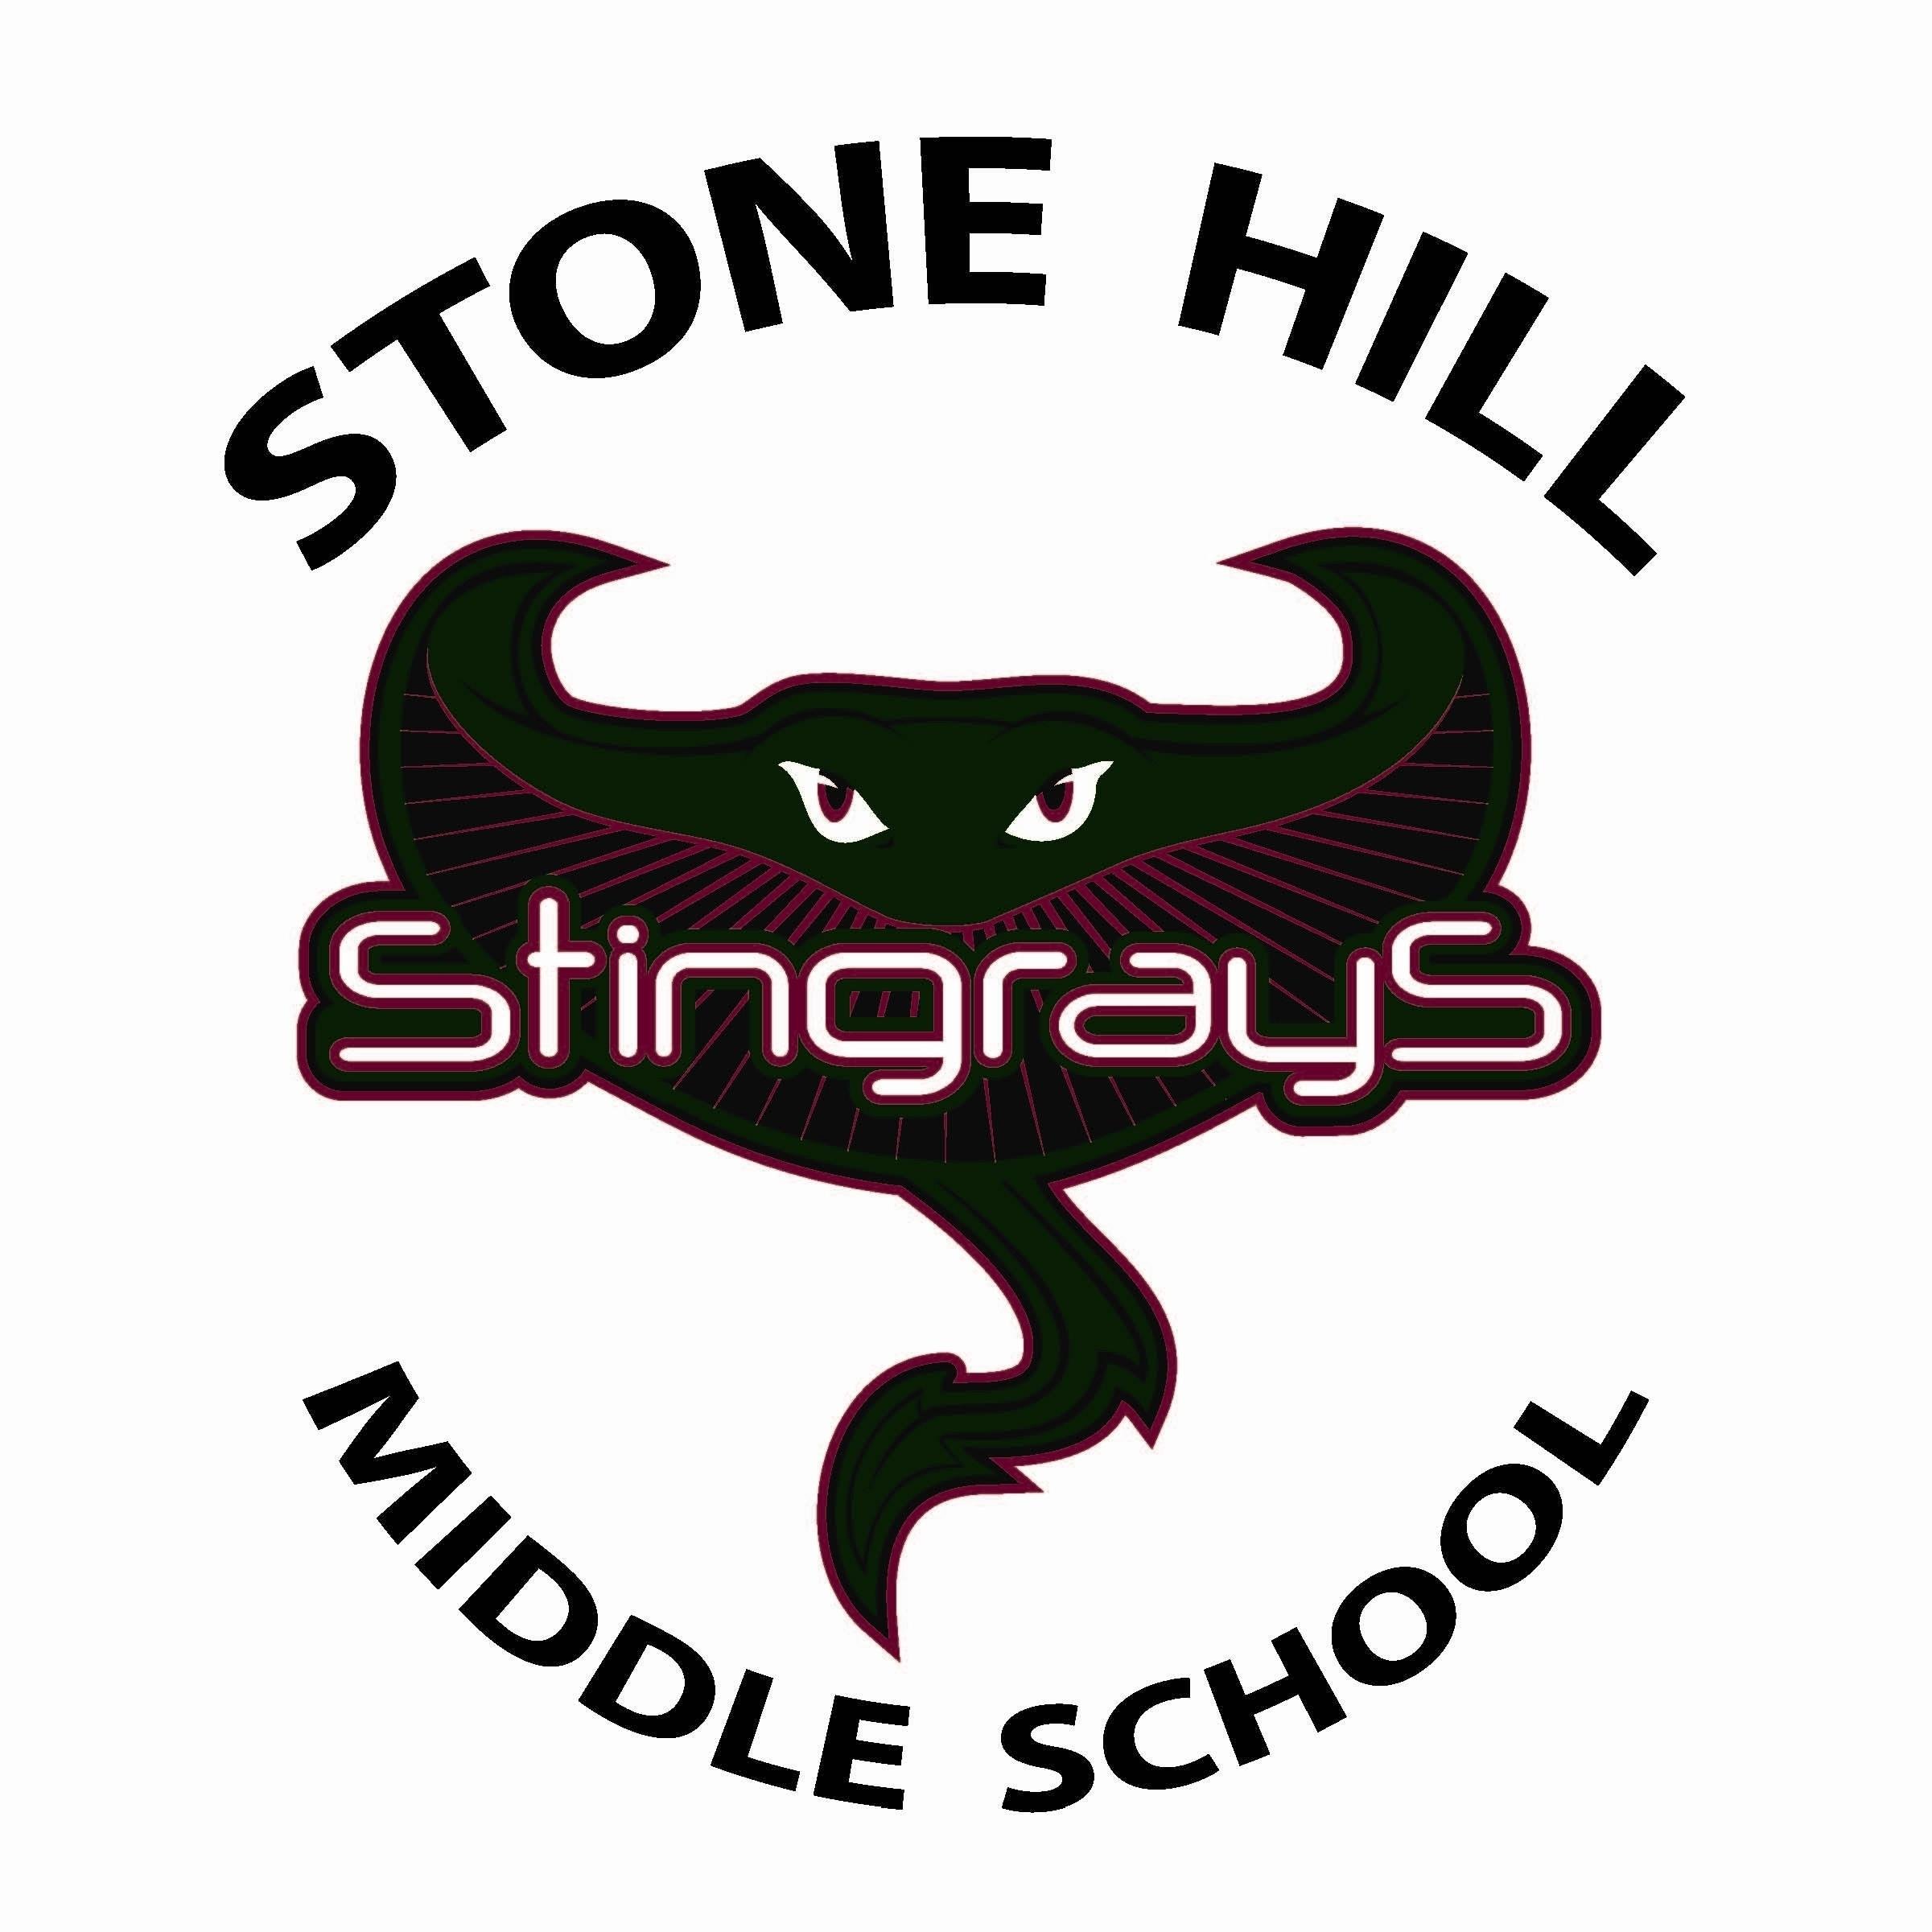 Stone Hill Middle